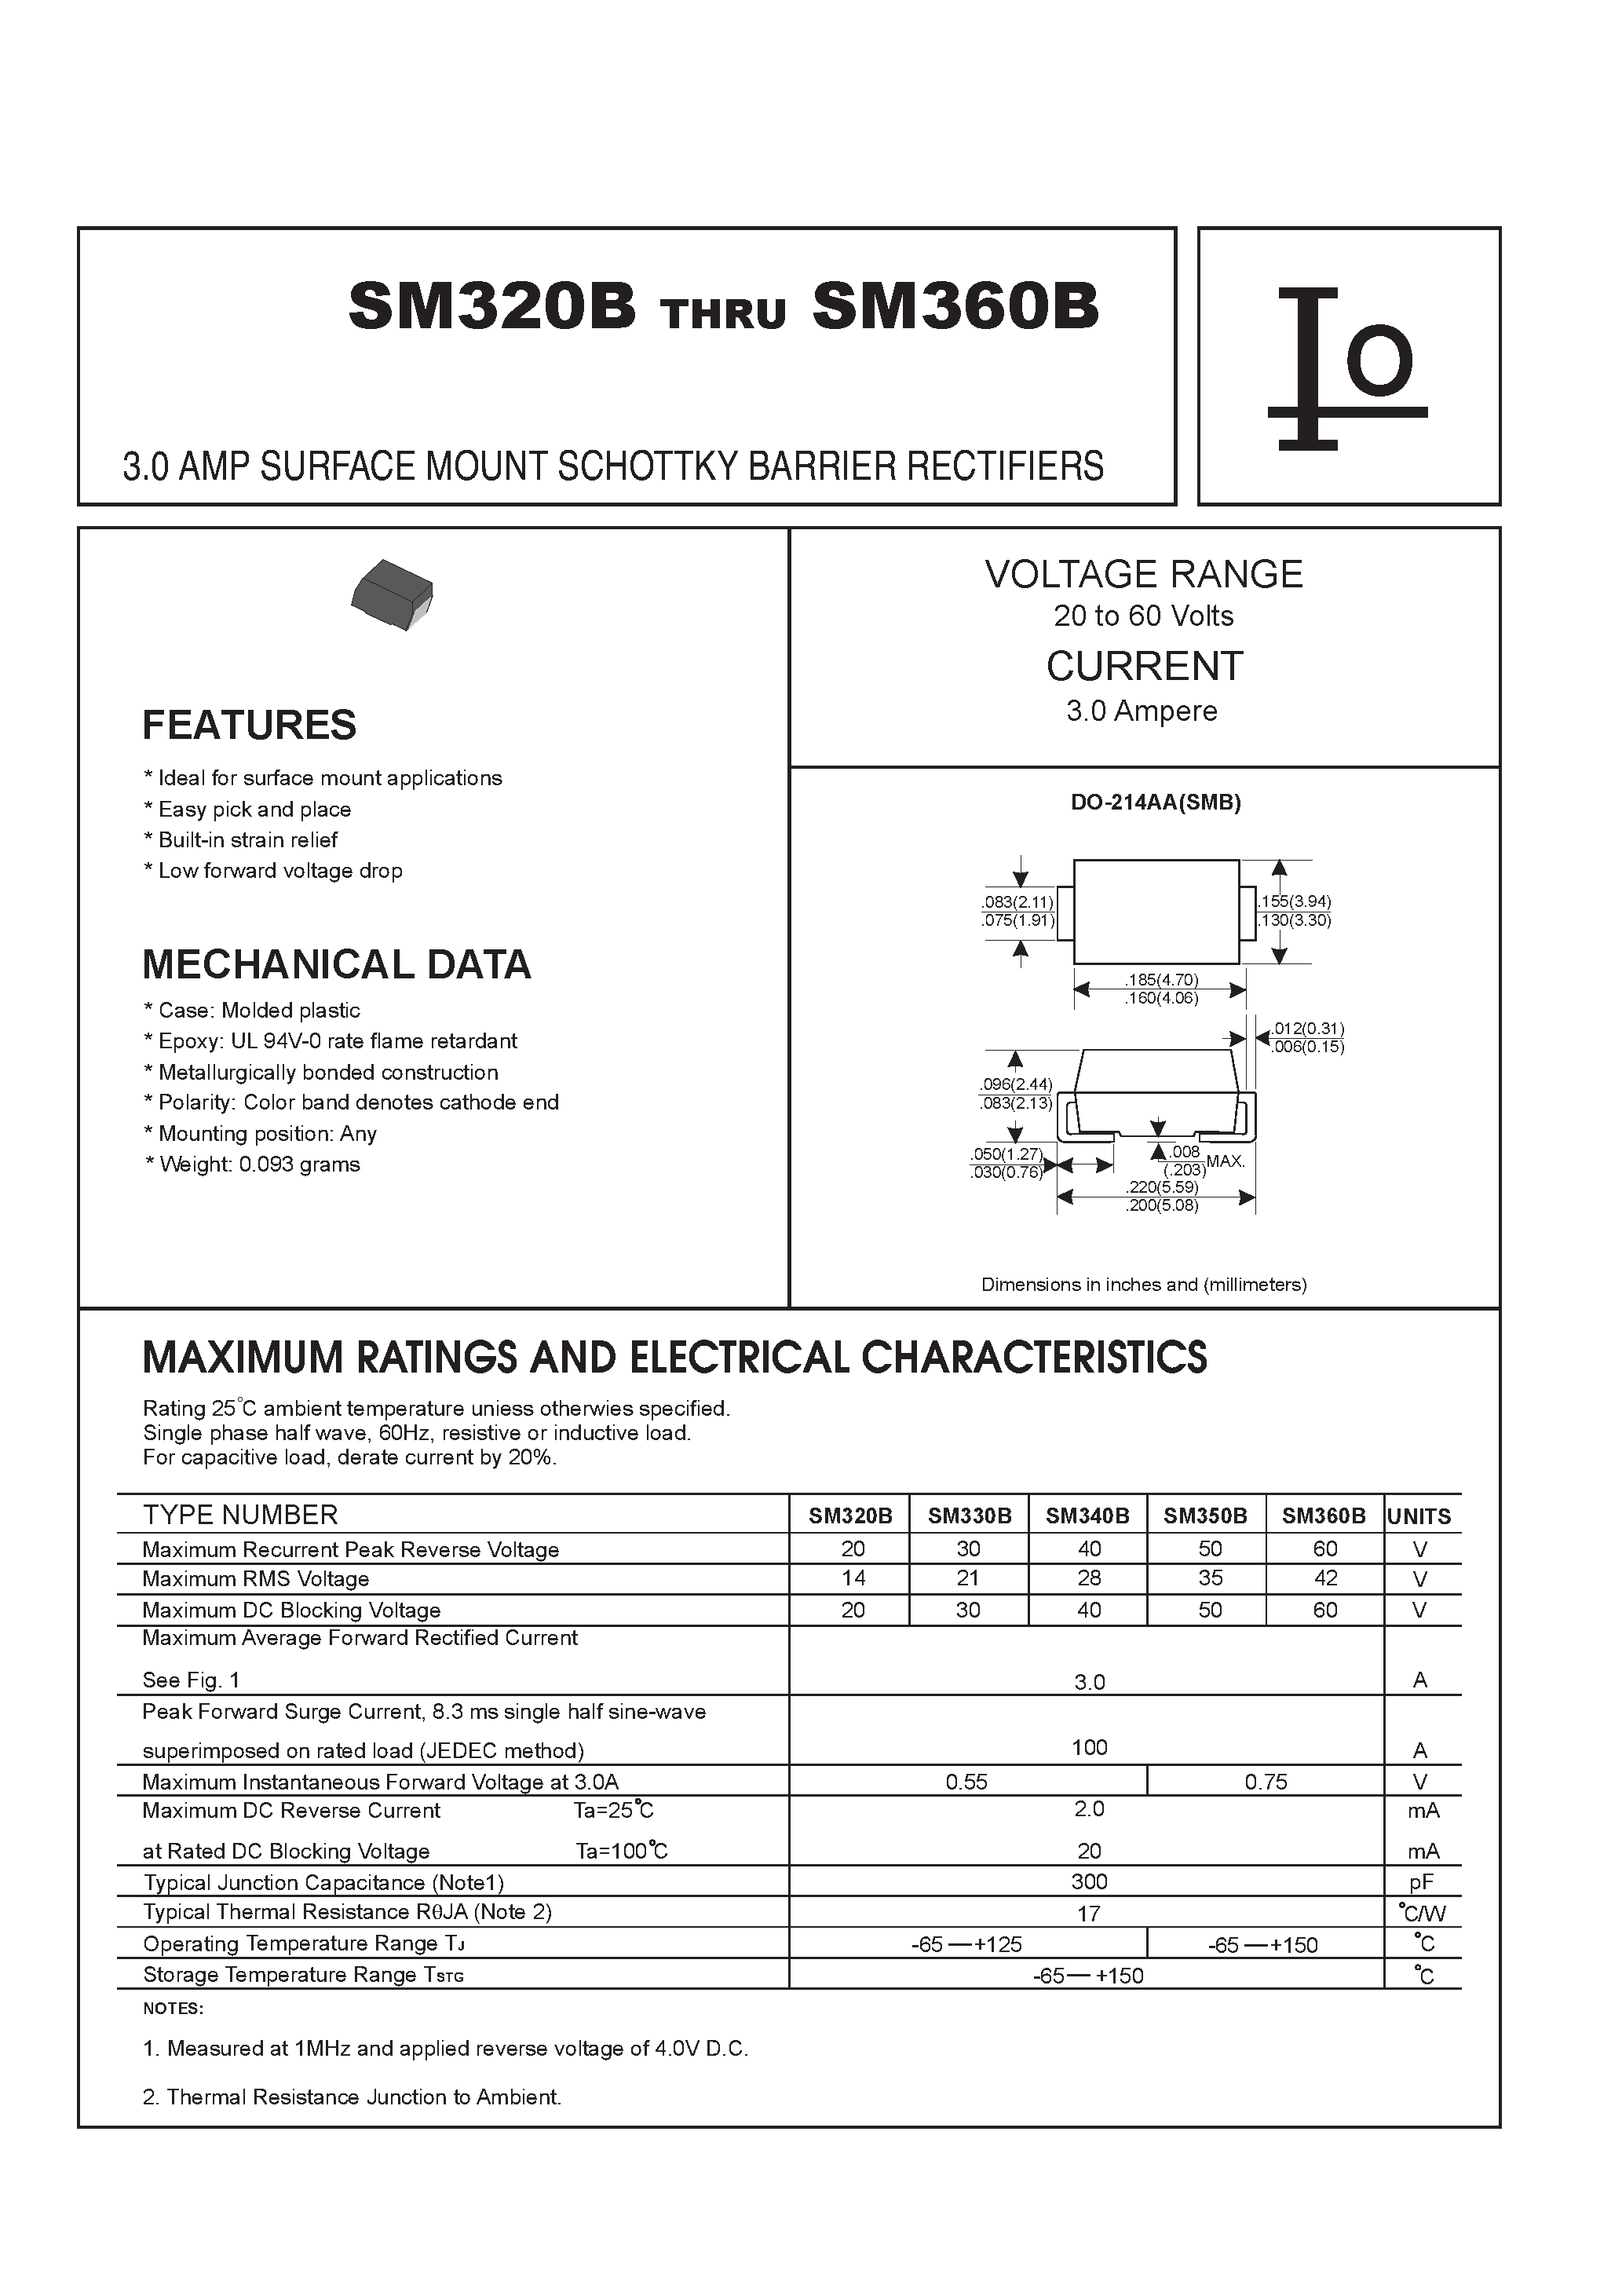 Datasheet SM320B - 3.0 AMP SURFACE MOUNT SCHOTTKY BARRIER RECTIFIERS page 1